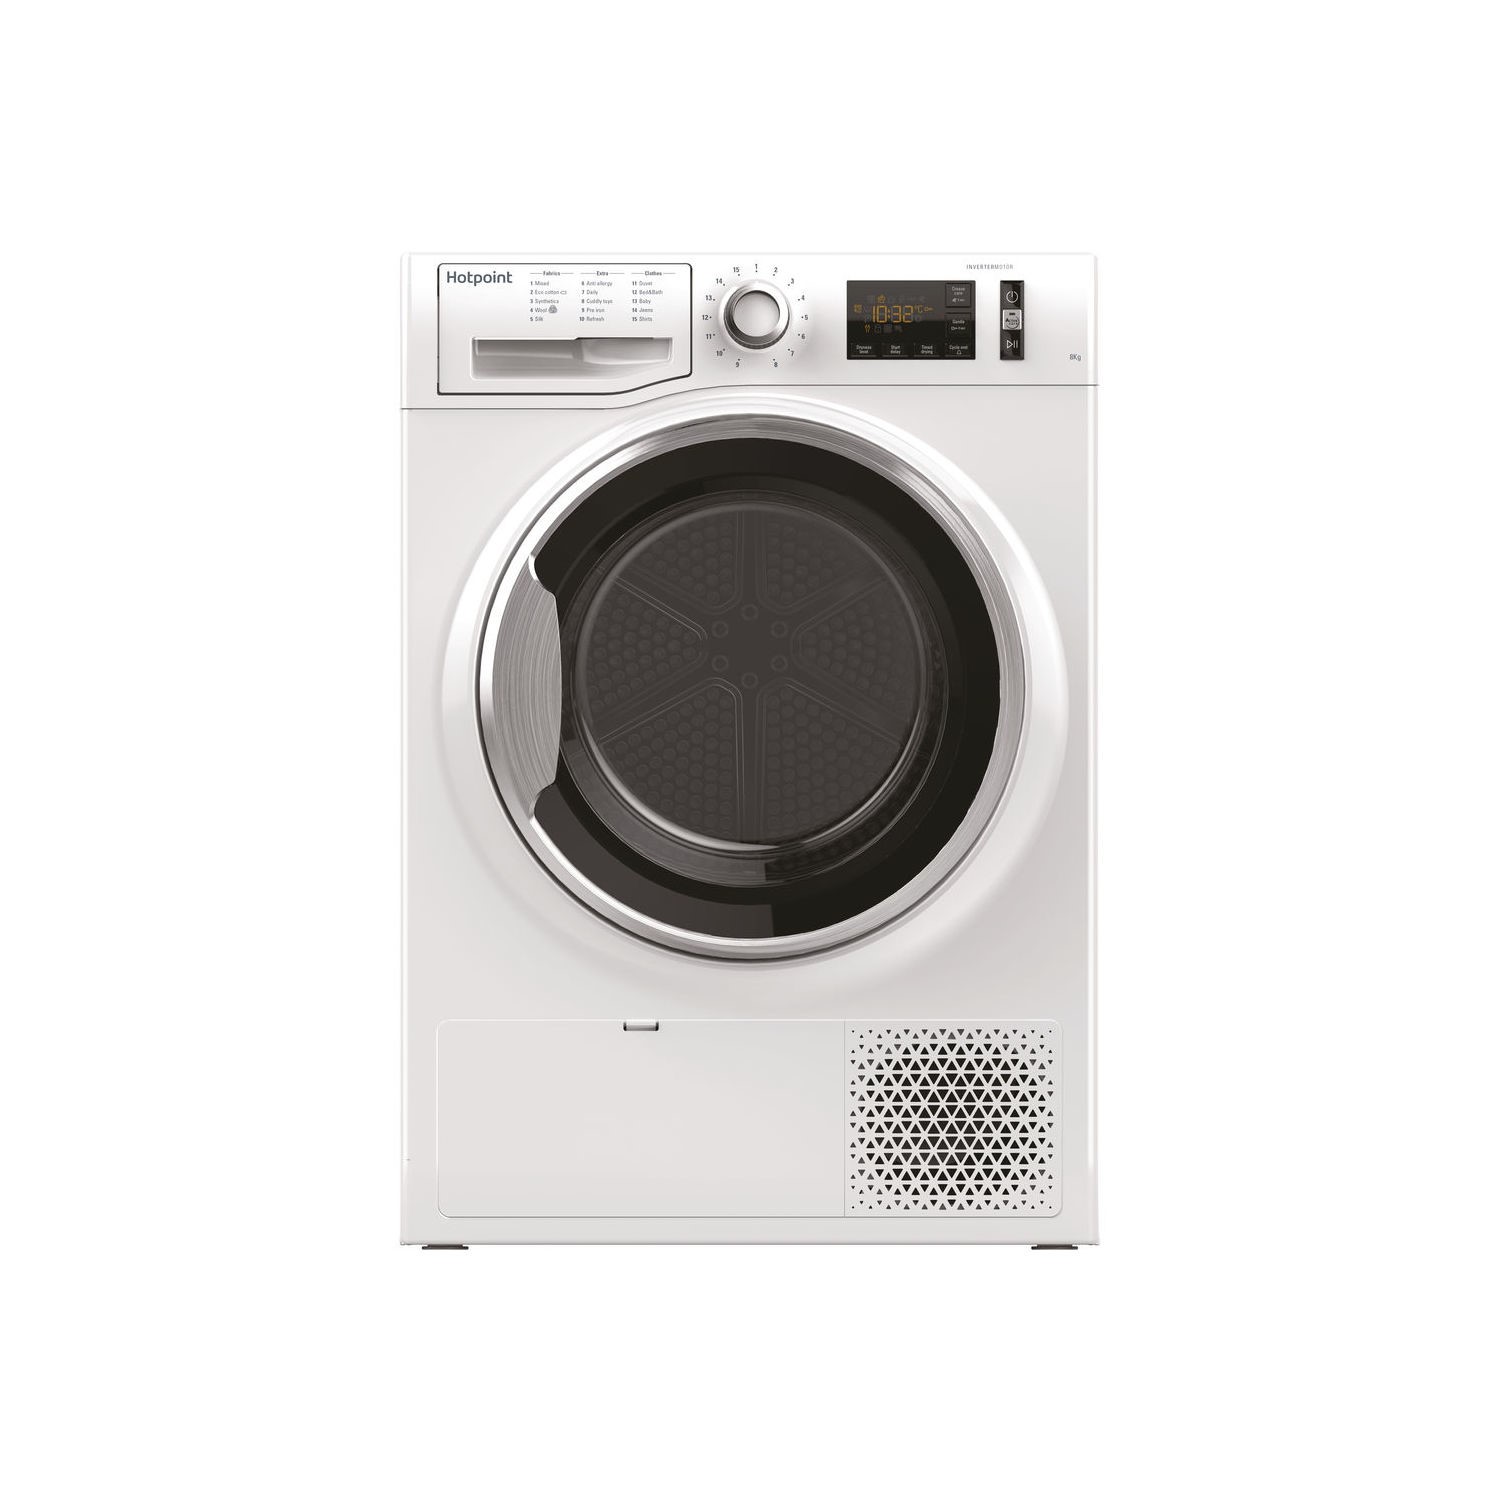 Refurbished Hotpoint ActiveCare NTM1182XB Freestanding Condenser 8KG Tumble Dryer With Heat Pump Tec